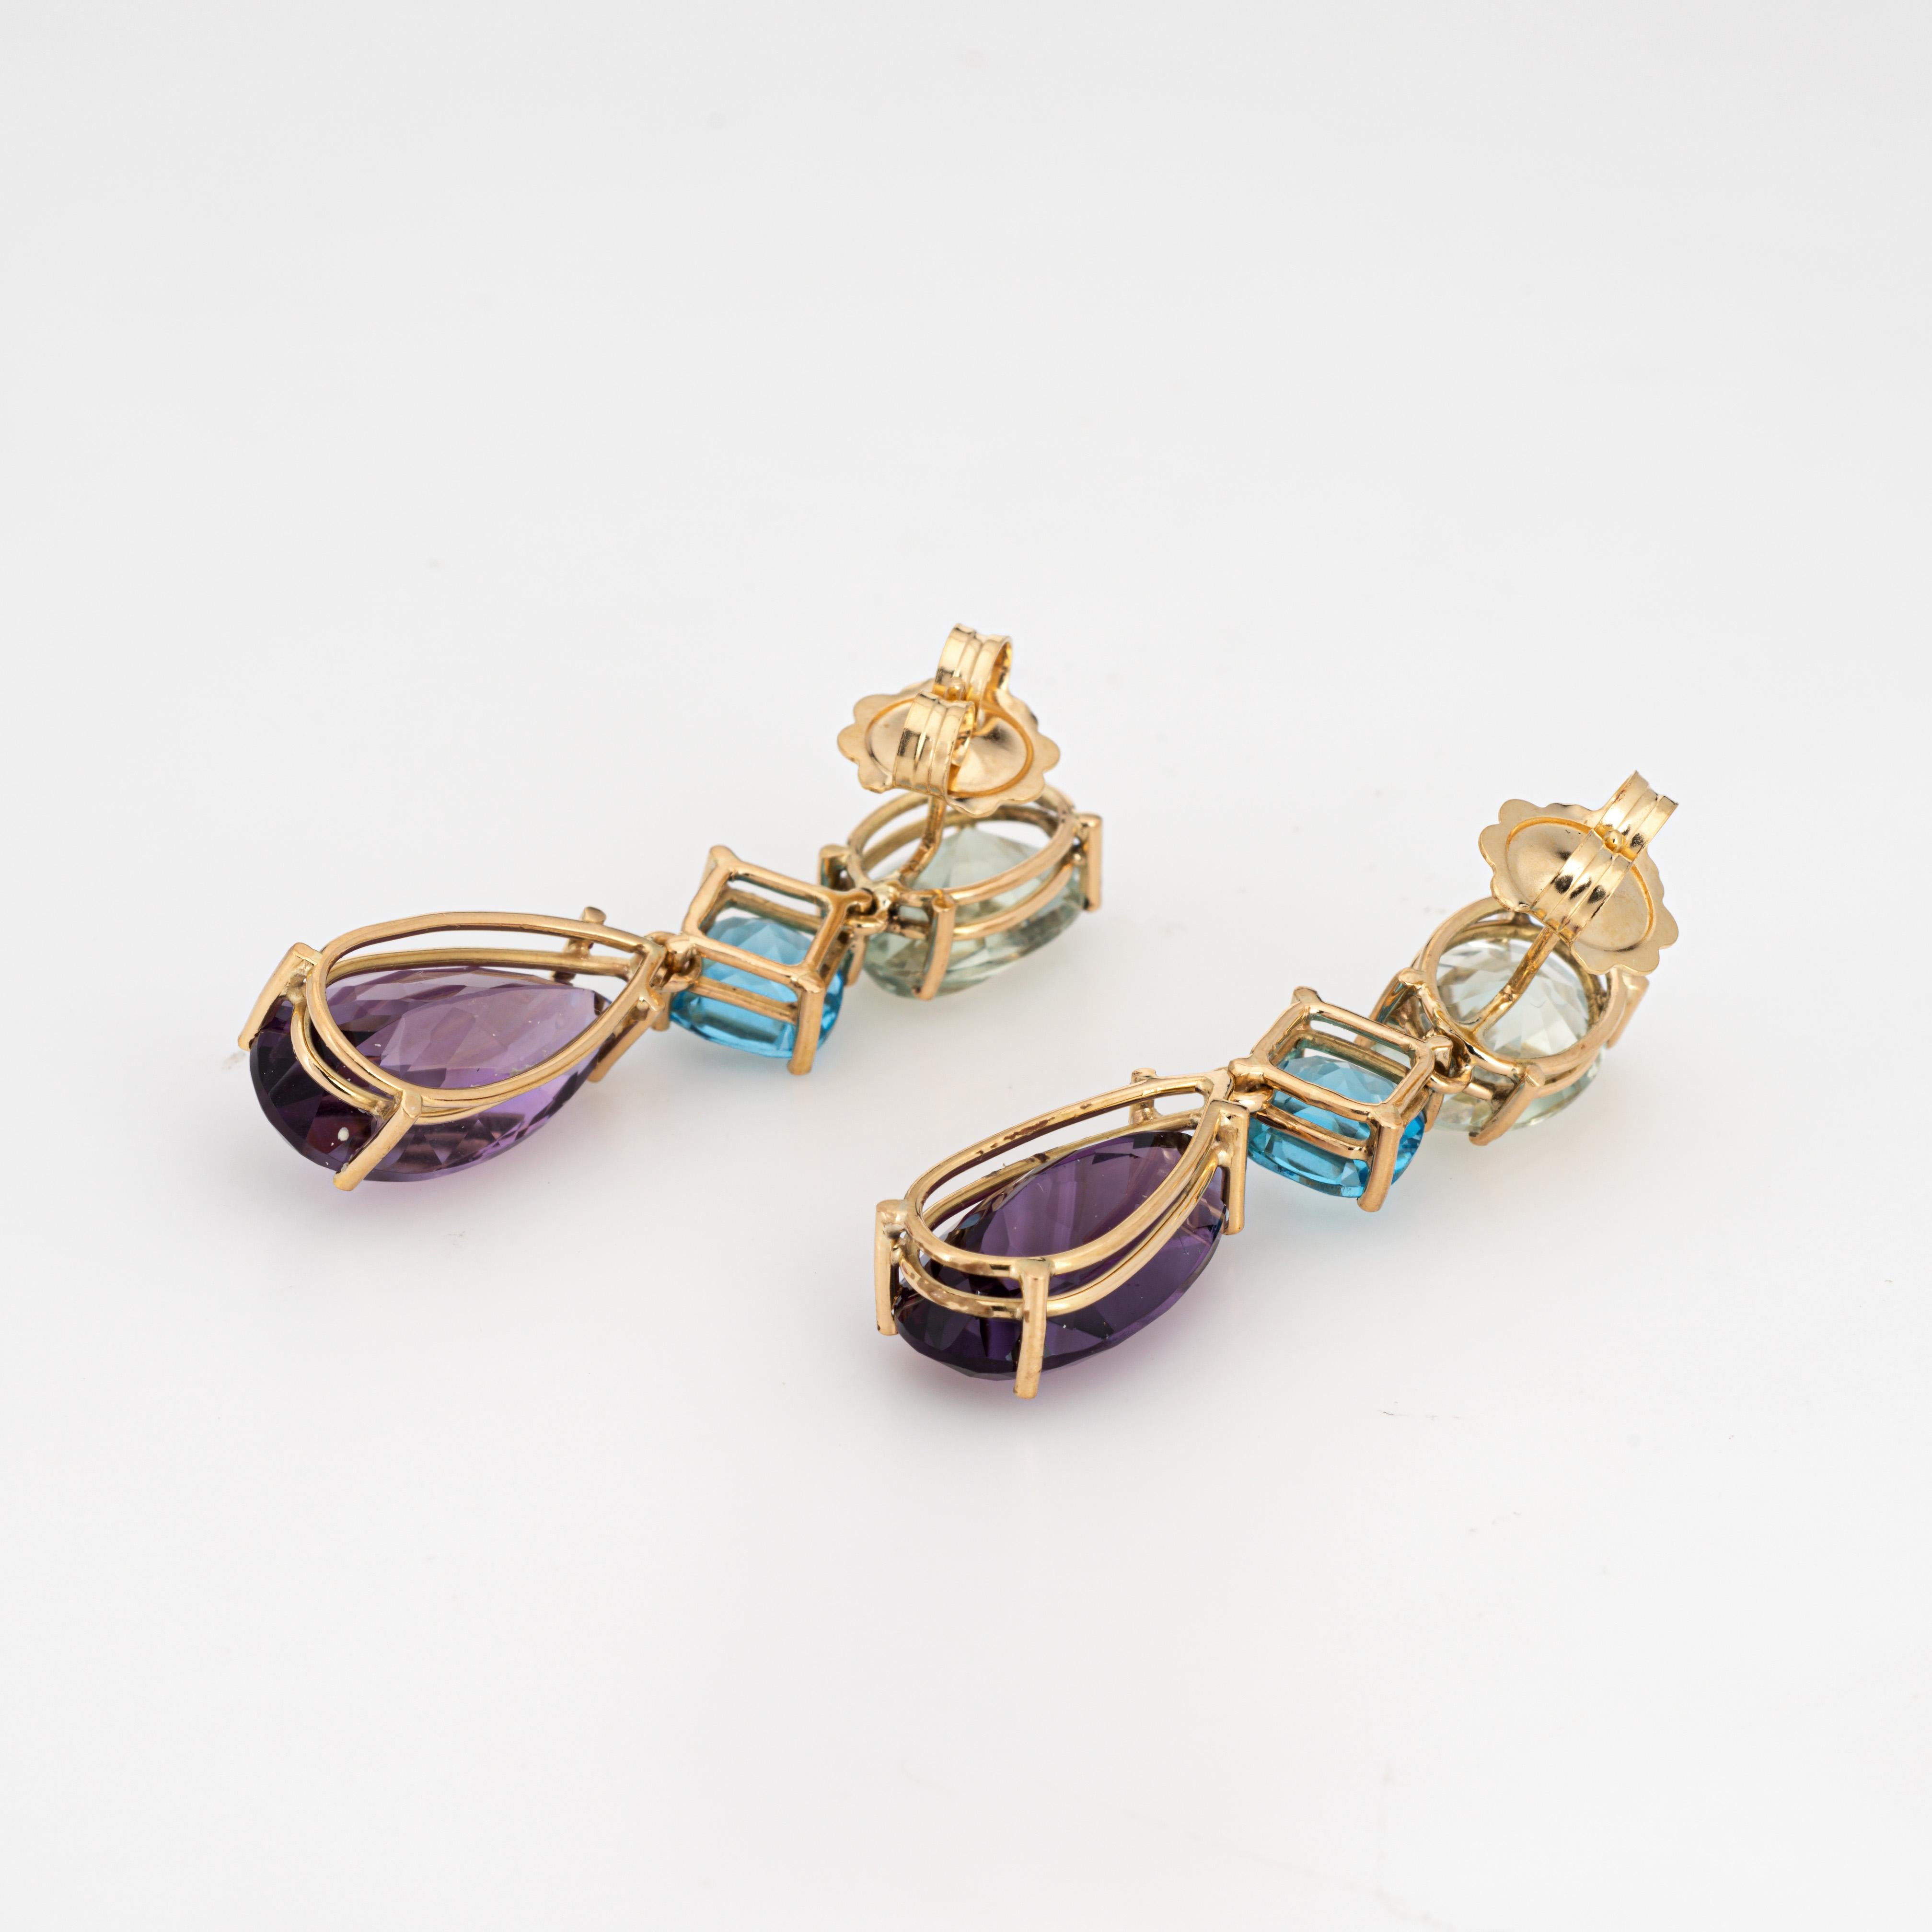 Elegant pair of multi gemstone drop earrings crafted in 18k yellow gold. 

Prasiolite measures 13mm x 9mm, blue topaz measures 8mm and amethyst measures 20mm x 10mm. The stones are in very good condition and free of cracks or chips. 

The 1 1/2 inch